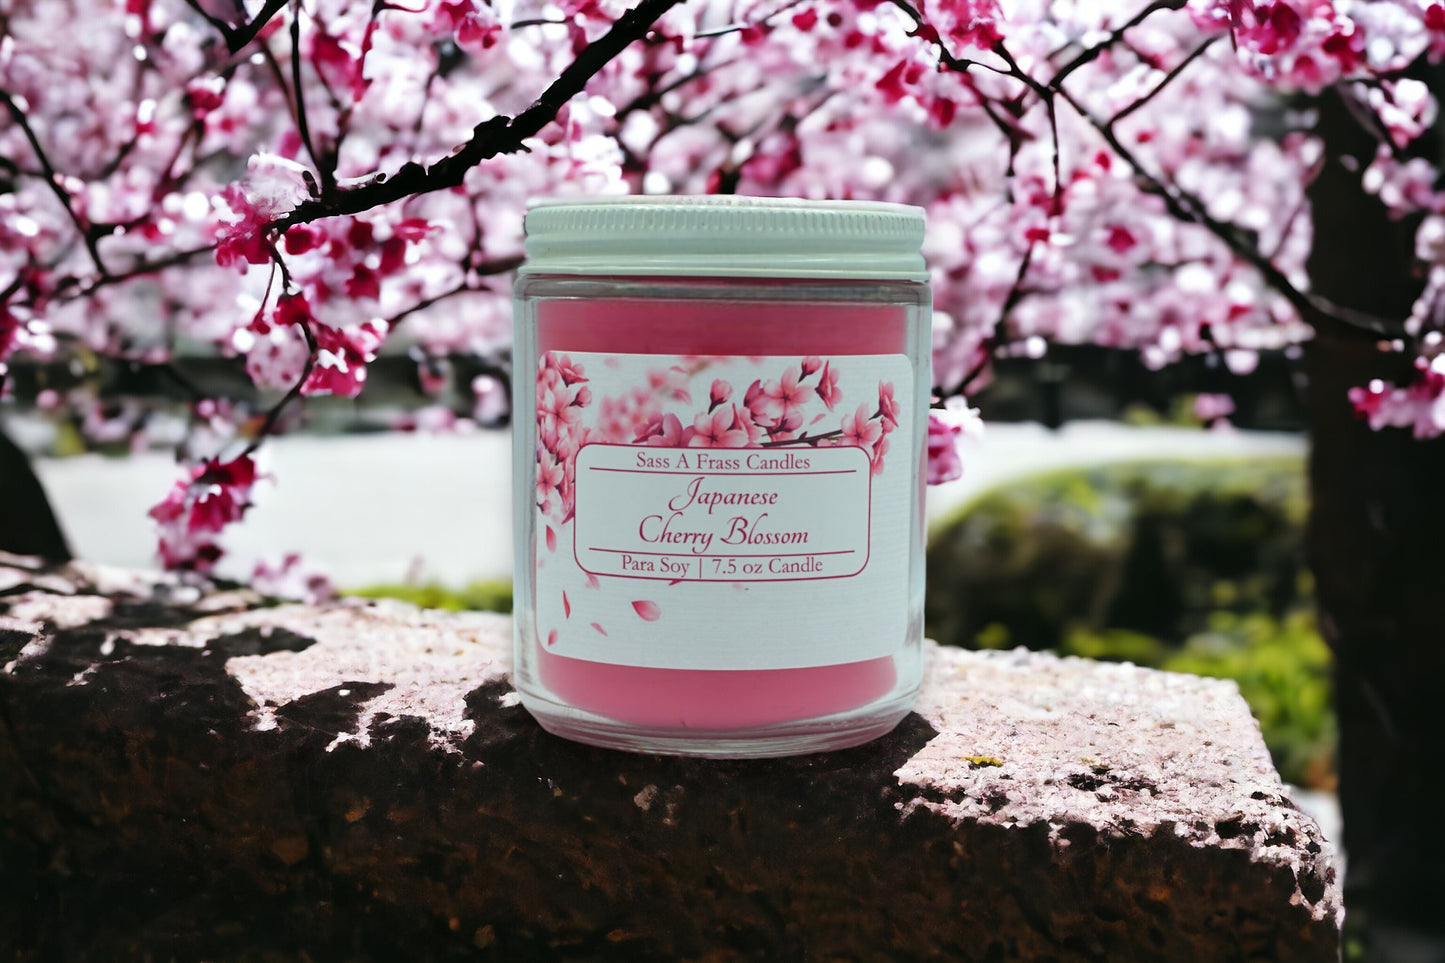 Japanese Cherry Blossom 7.5 oz Candle